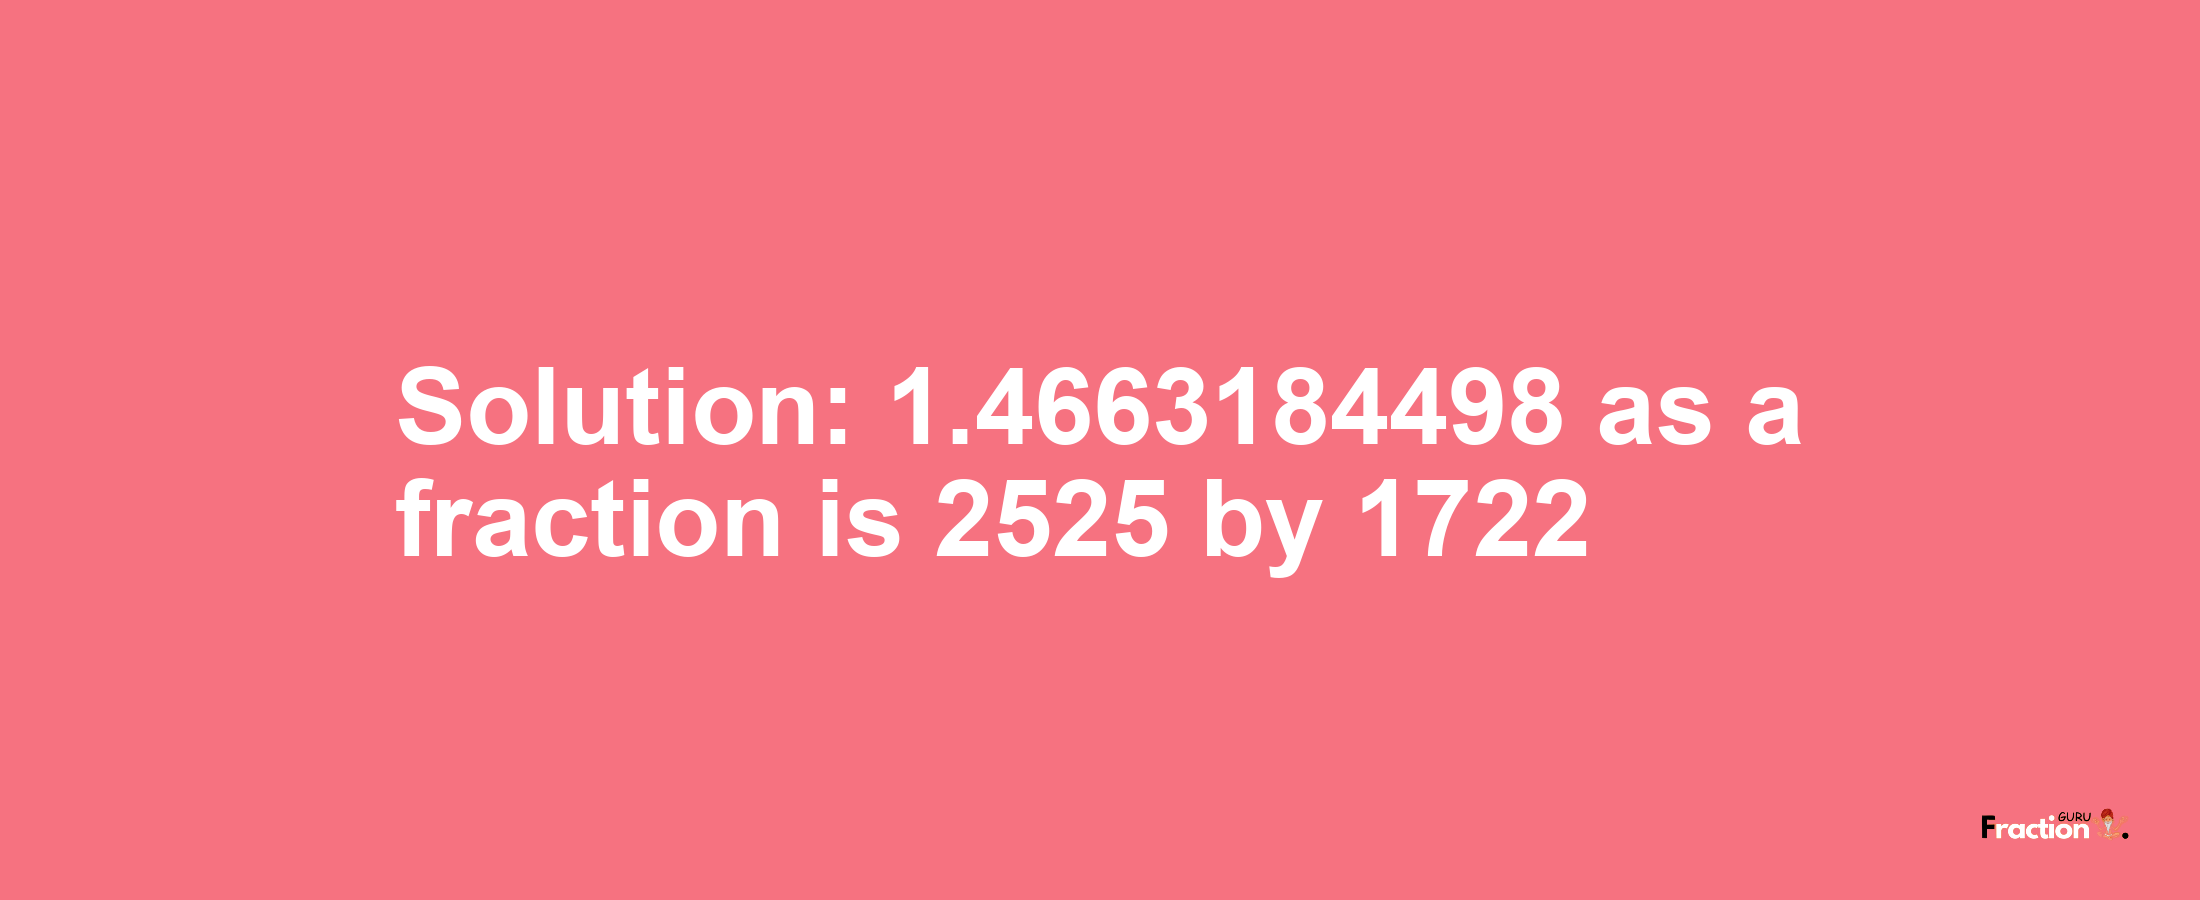 Solution:1.4663184498 as a fraction is 2525/1722